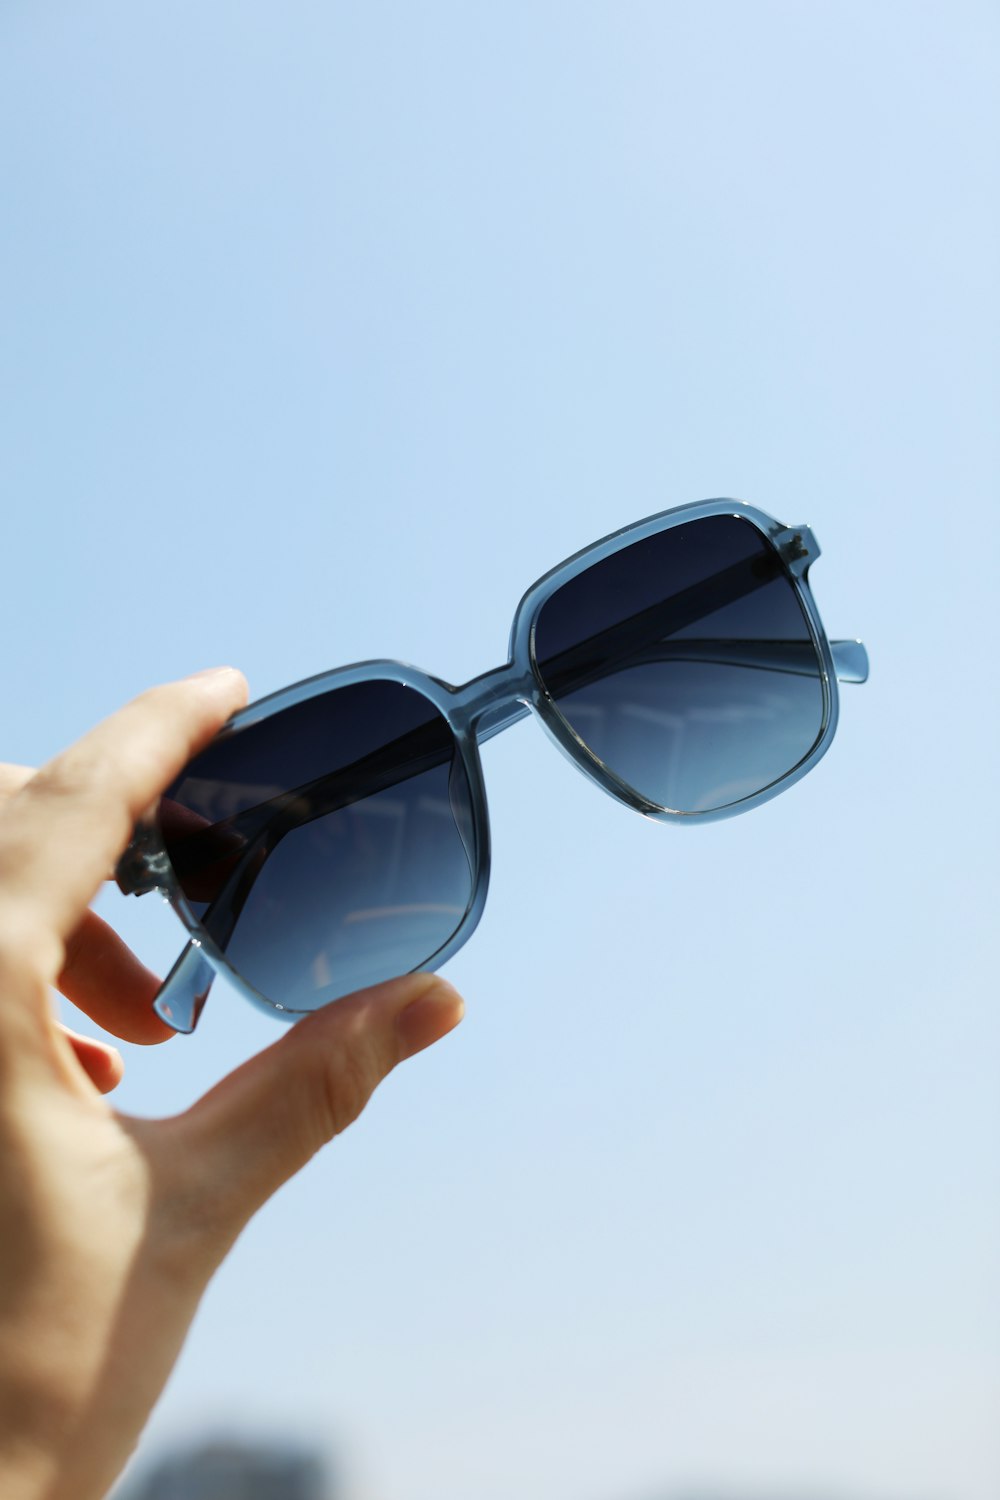 a person holding a pair of sunglasses in their hand